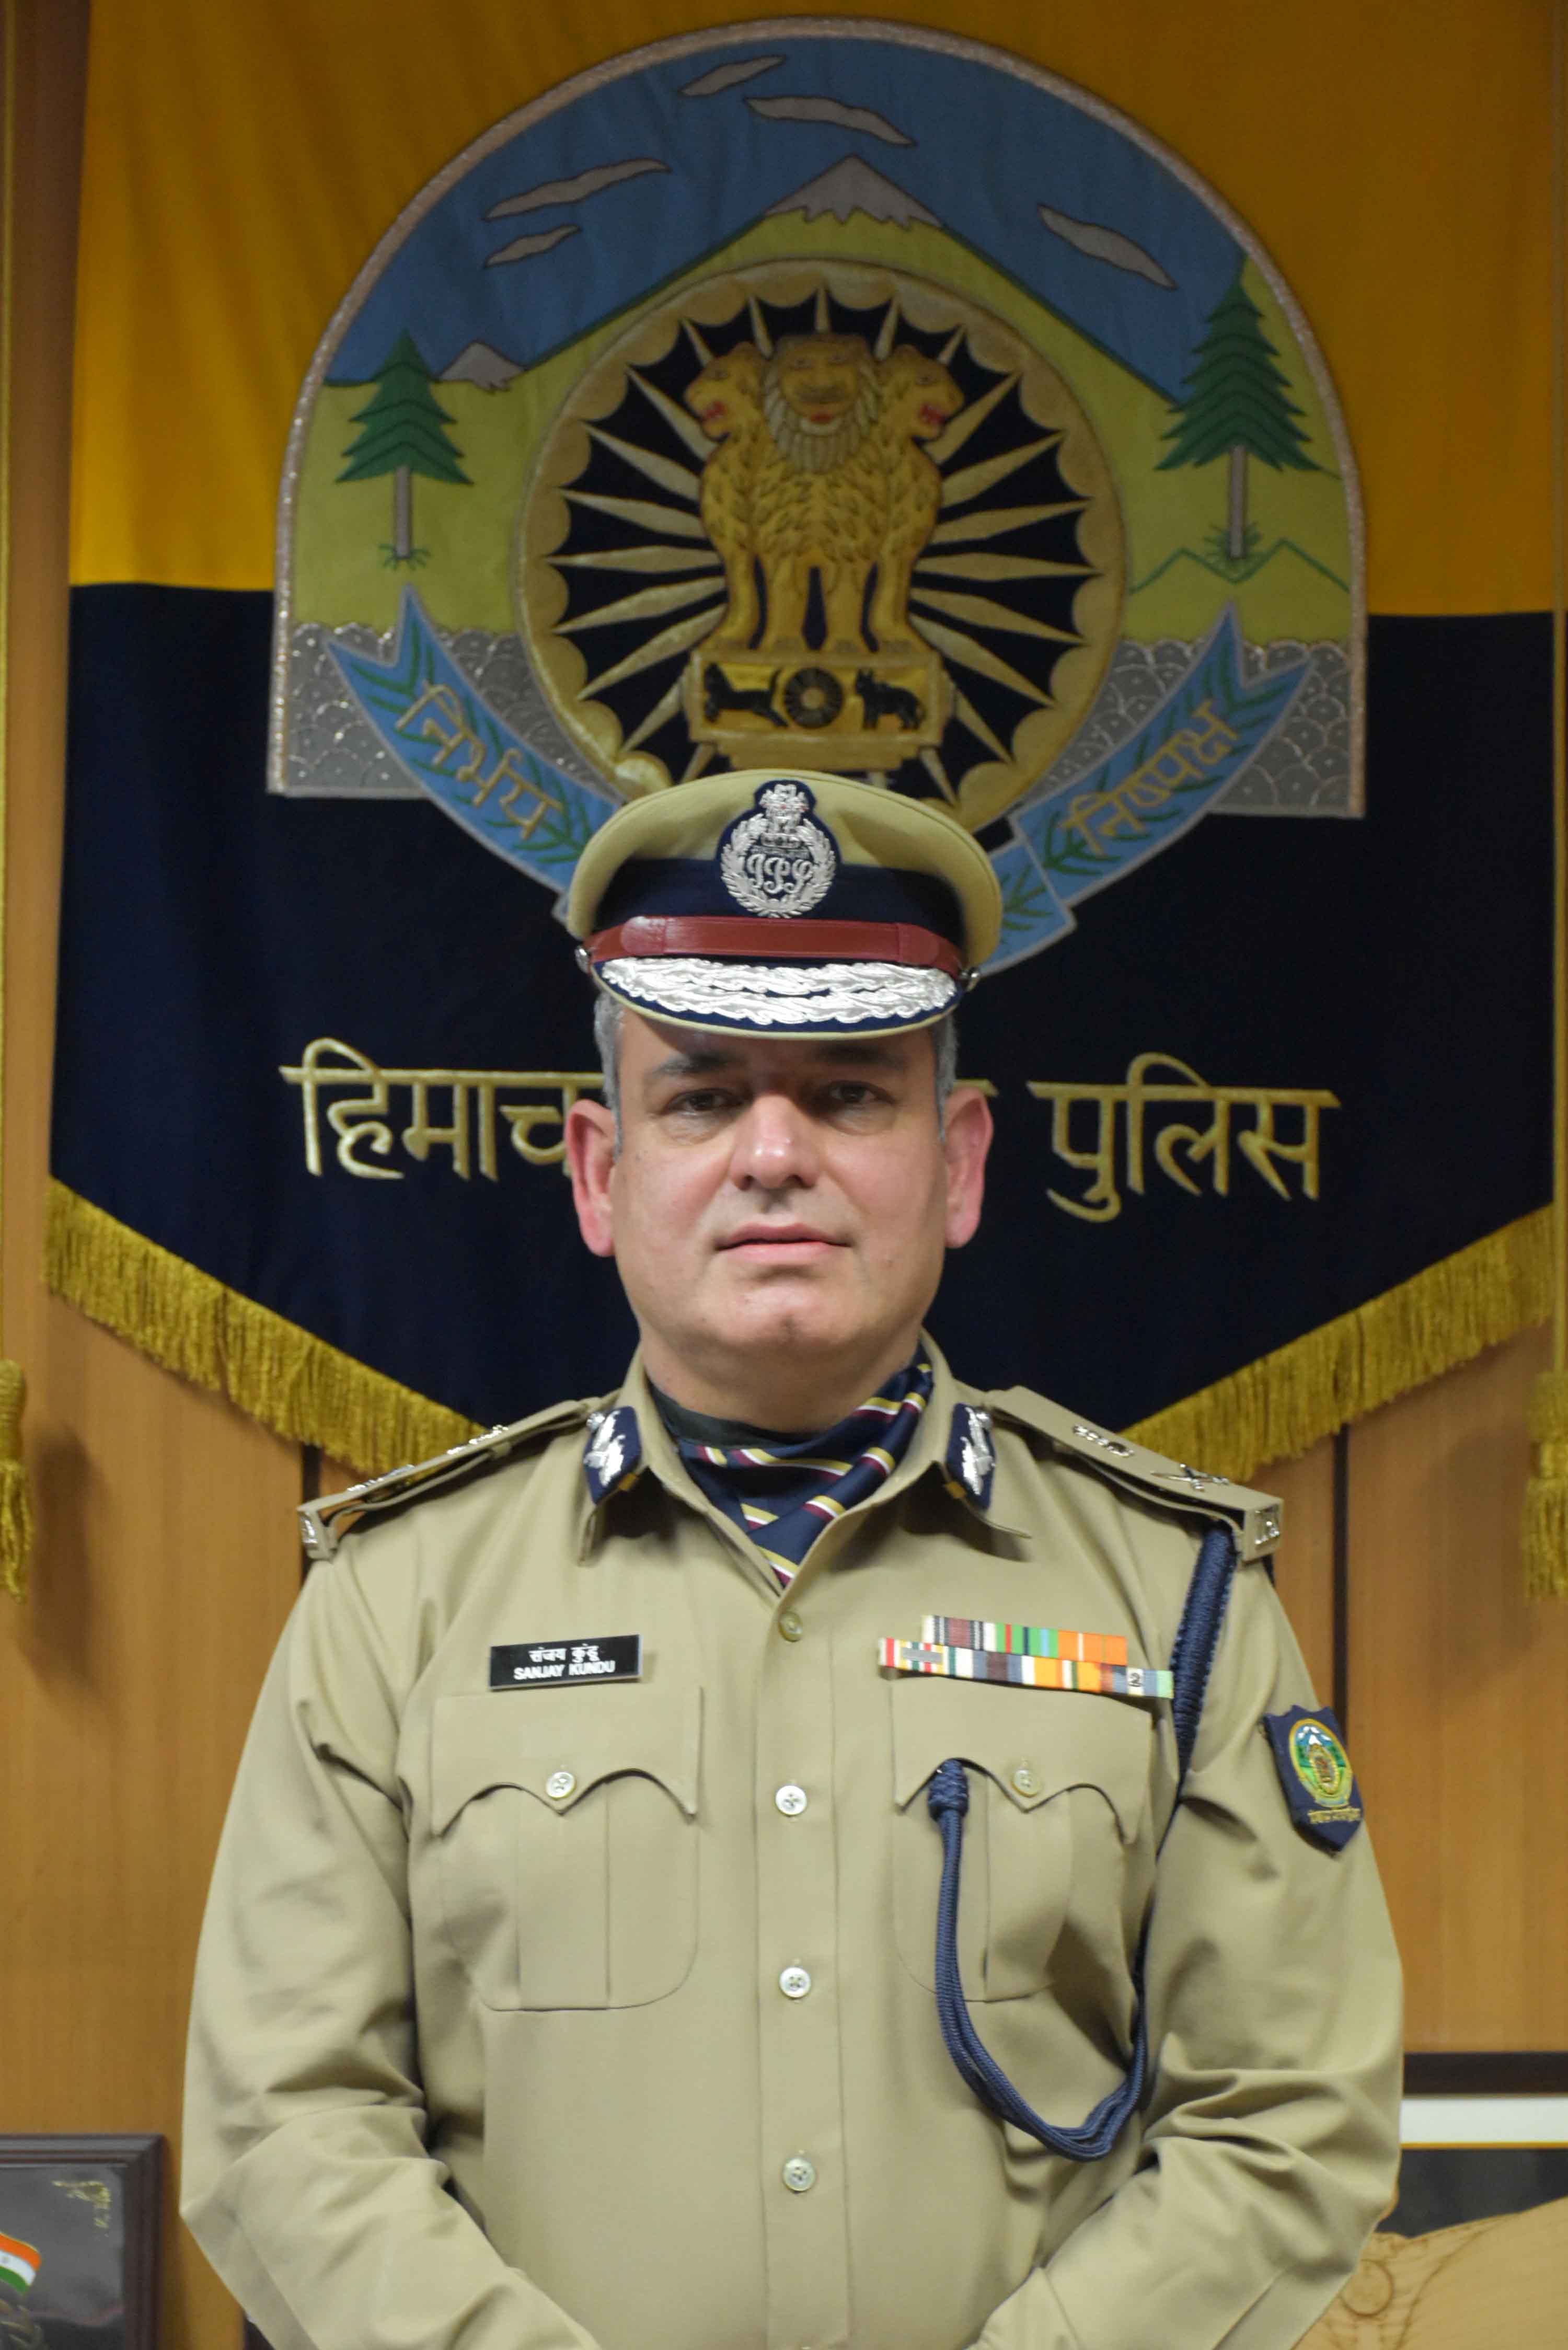 Himachal Pradesh first to start robust trial management in NDPS cases: DGP